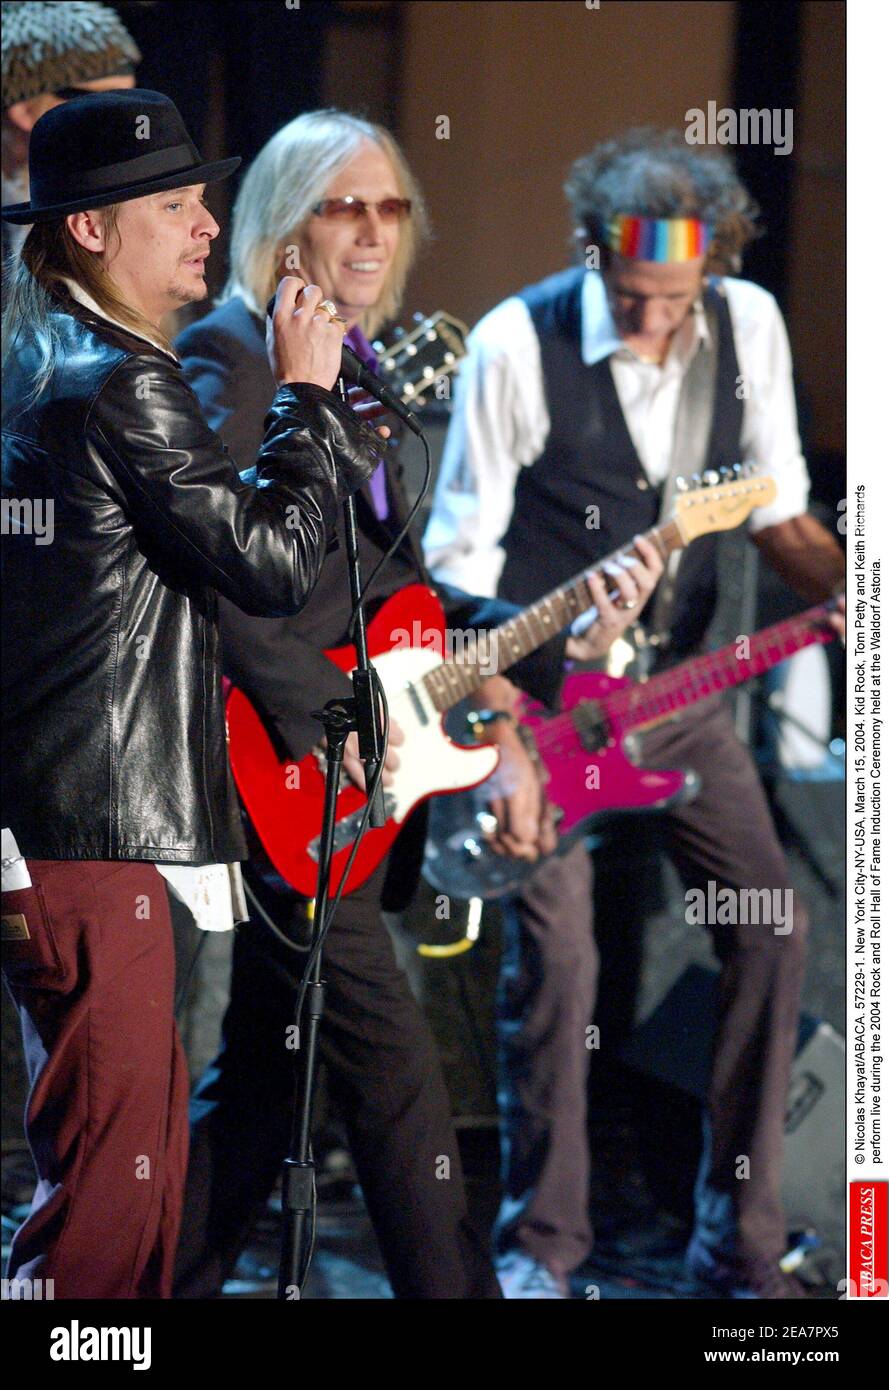 Kid Rock, Tom Petty and Keith Richards perform live during the 2004 Rock and Roll Hall of Fame Induction Ceremony held at the Waldorf Astoria in New York, on Monday, March 15, 2004. (Pictured : Kid Rock, Tom Petty, Keith Richards). Photo by Nicolas Khayat/ABACA. Stock Photo